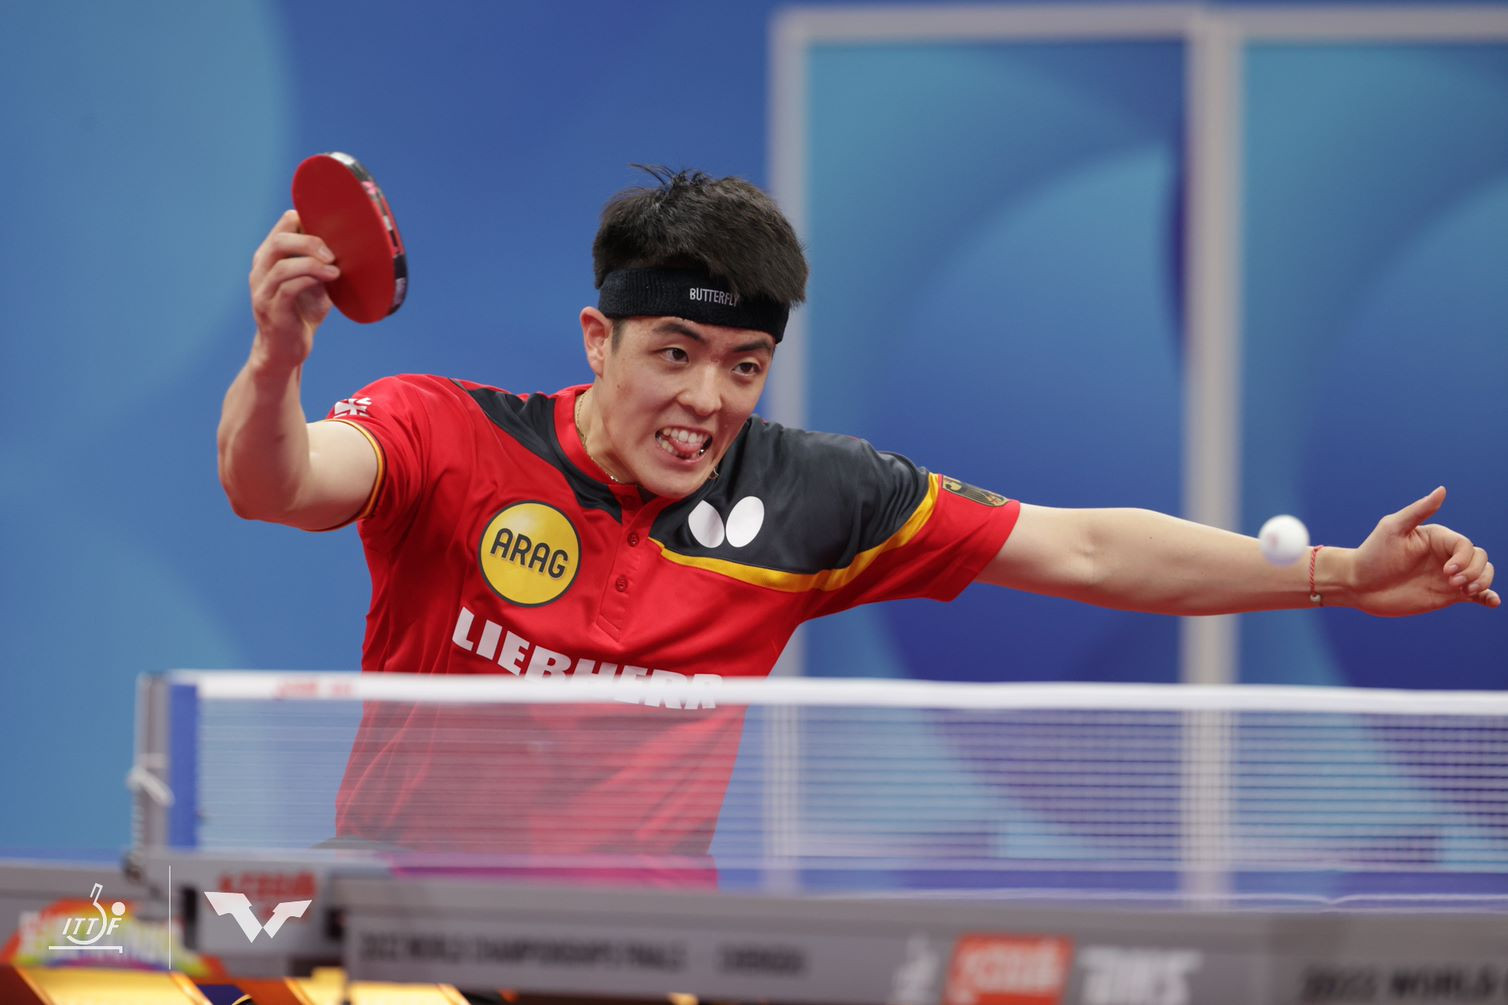 Commonwealth Games champions India upset Germany at ITTF World Team Table Tennis Championships